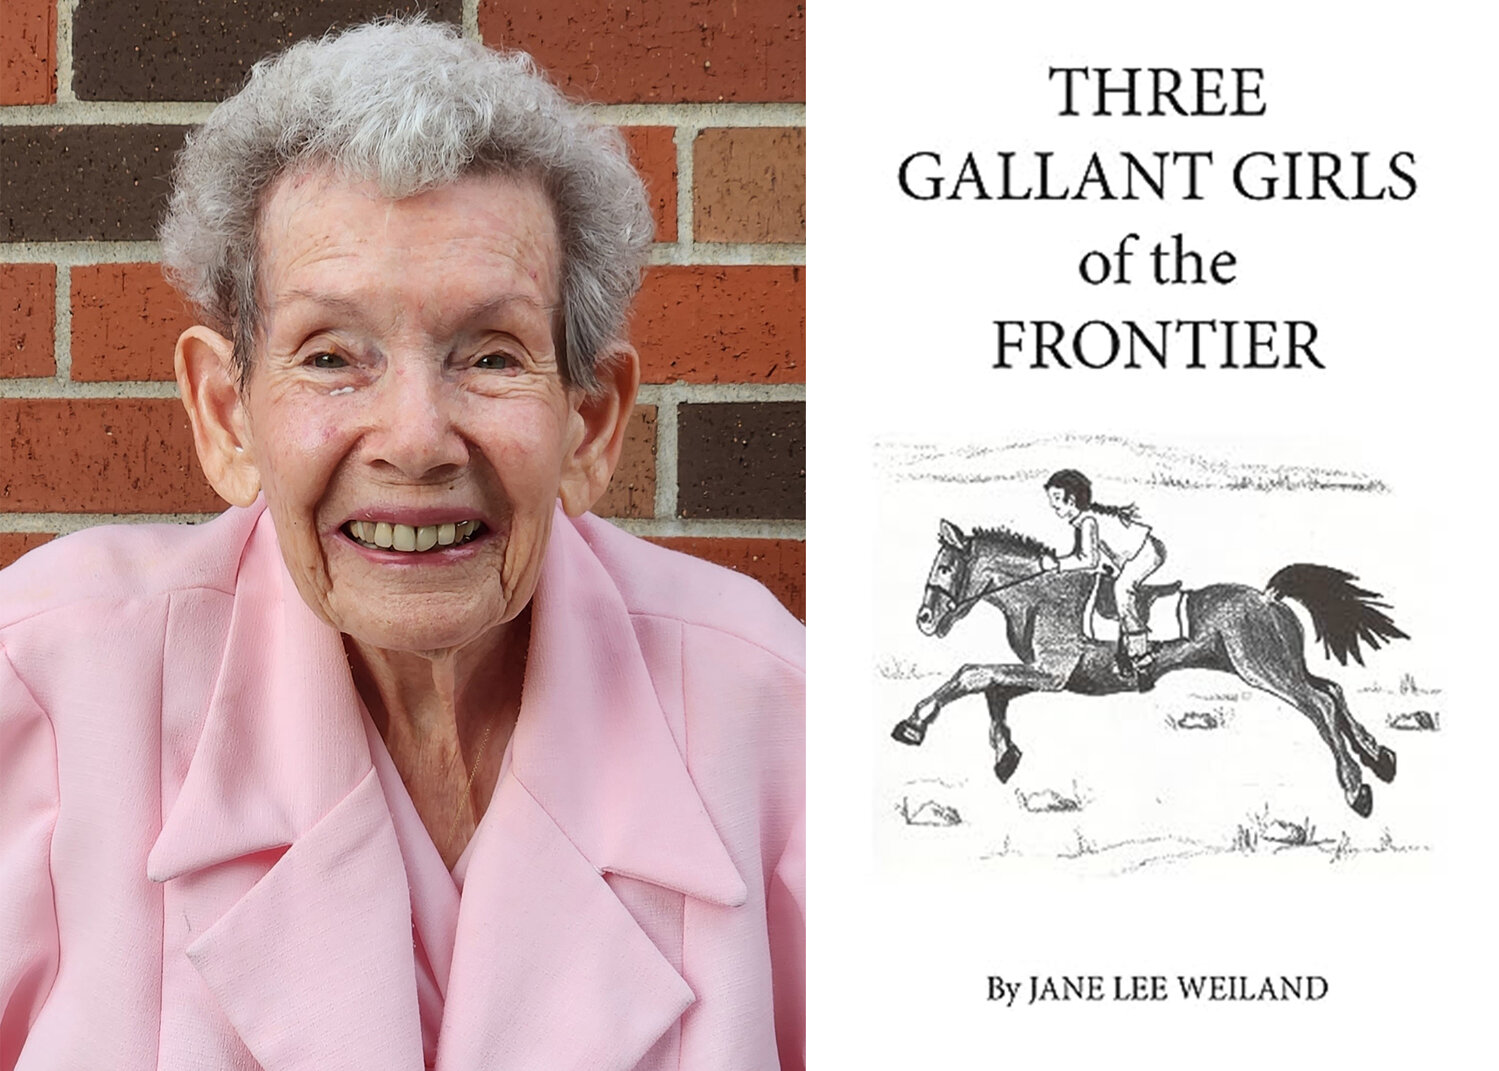 Jane Lee Weiland is author of Three Gallant Girls of the Frontier, available at Amazon.com.